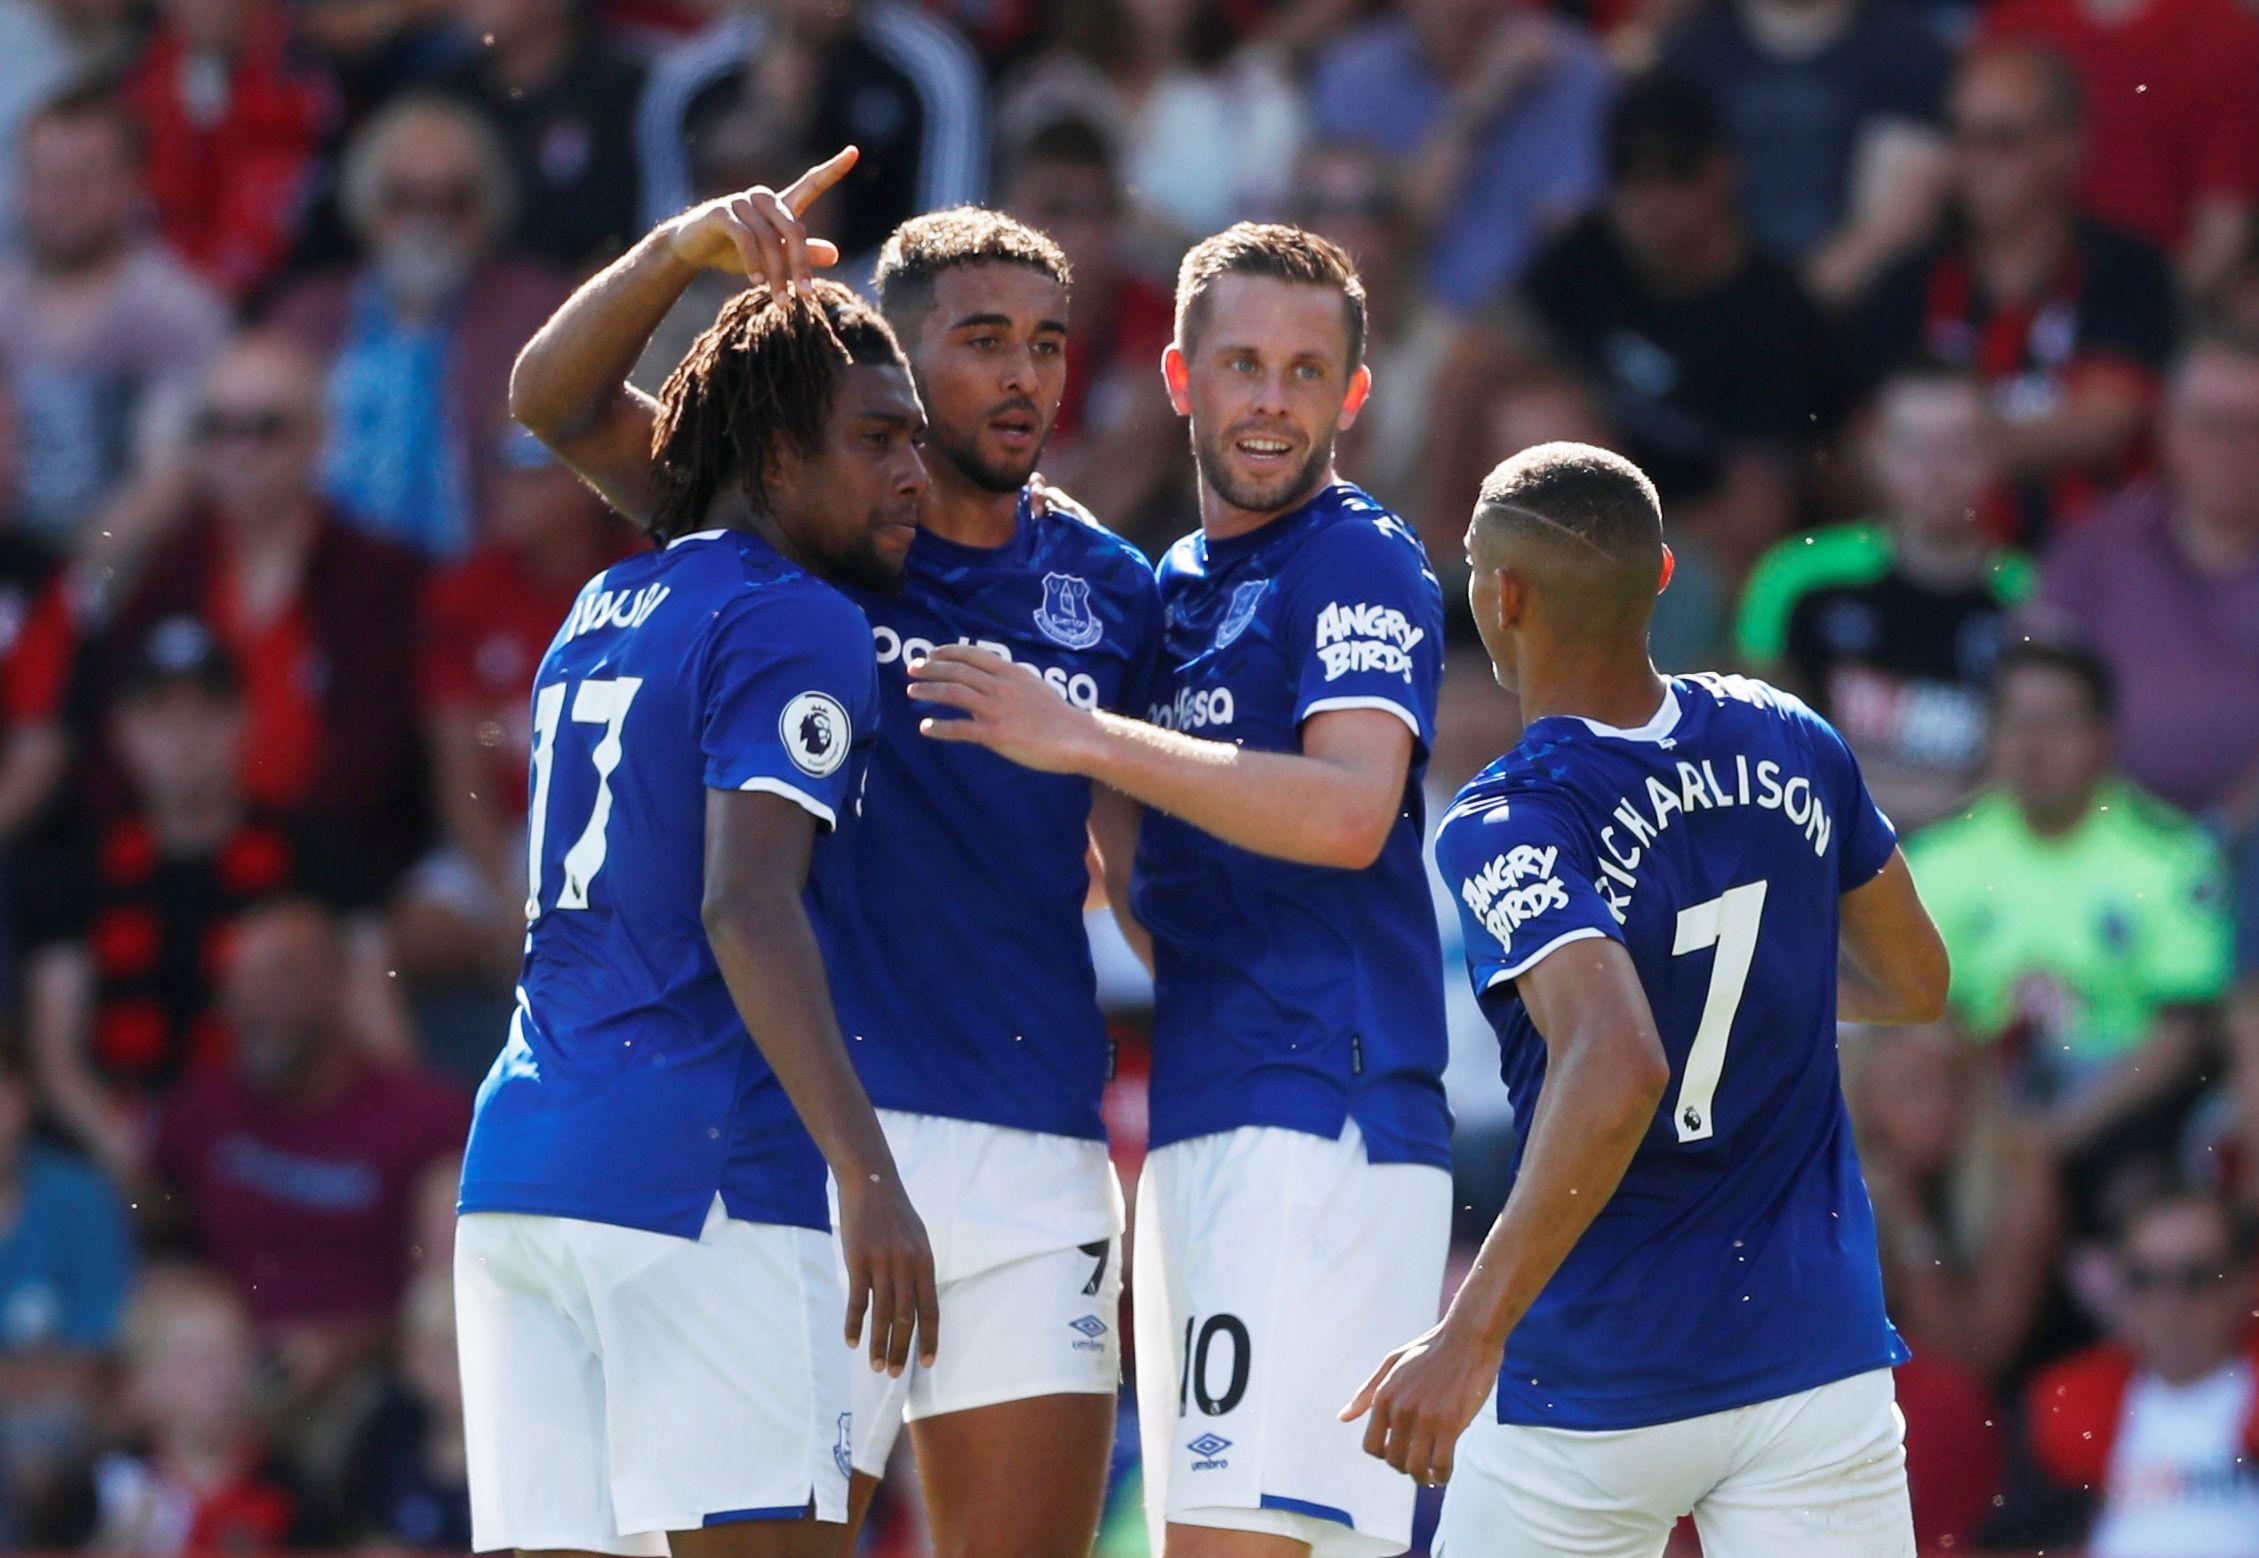 Soccer Football - Premier League - AFC Bournemouth v Everton - Vitality Stadium, Bournemouth, Britain - September 15, 2019  Everton's Dominic Calvert-Lewin celebrates scoring their first goal with team mates  Action Images via Reuters/Matthew Childs  EDITORIAL USE ONLY. No use with unauthorized audio, video, data, fixture lists, club/league logos or "live" services. Online in-match use limited to 75 images, no video emulation. No use in betting, games or single club/league/player publications.  